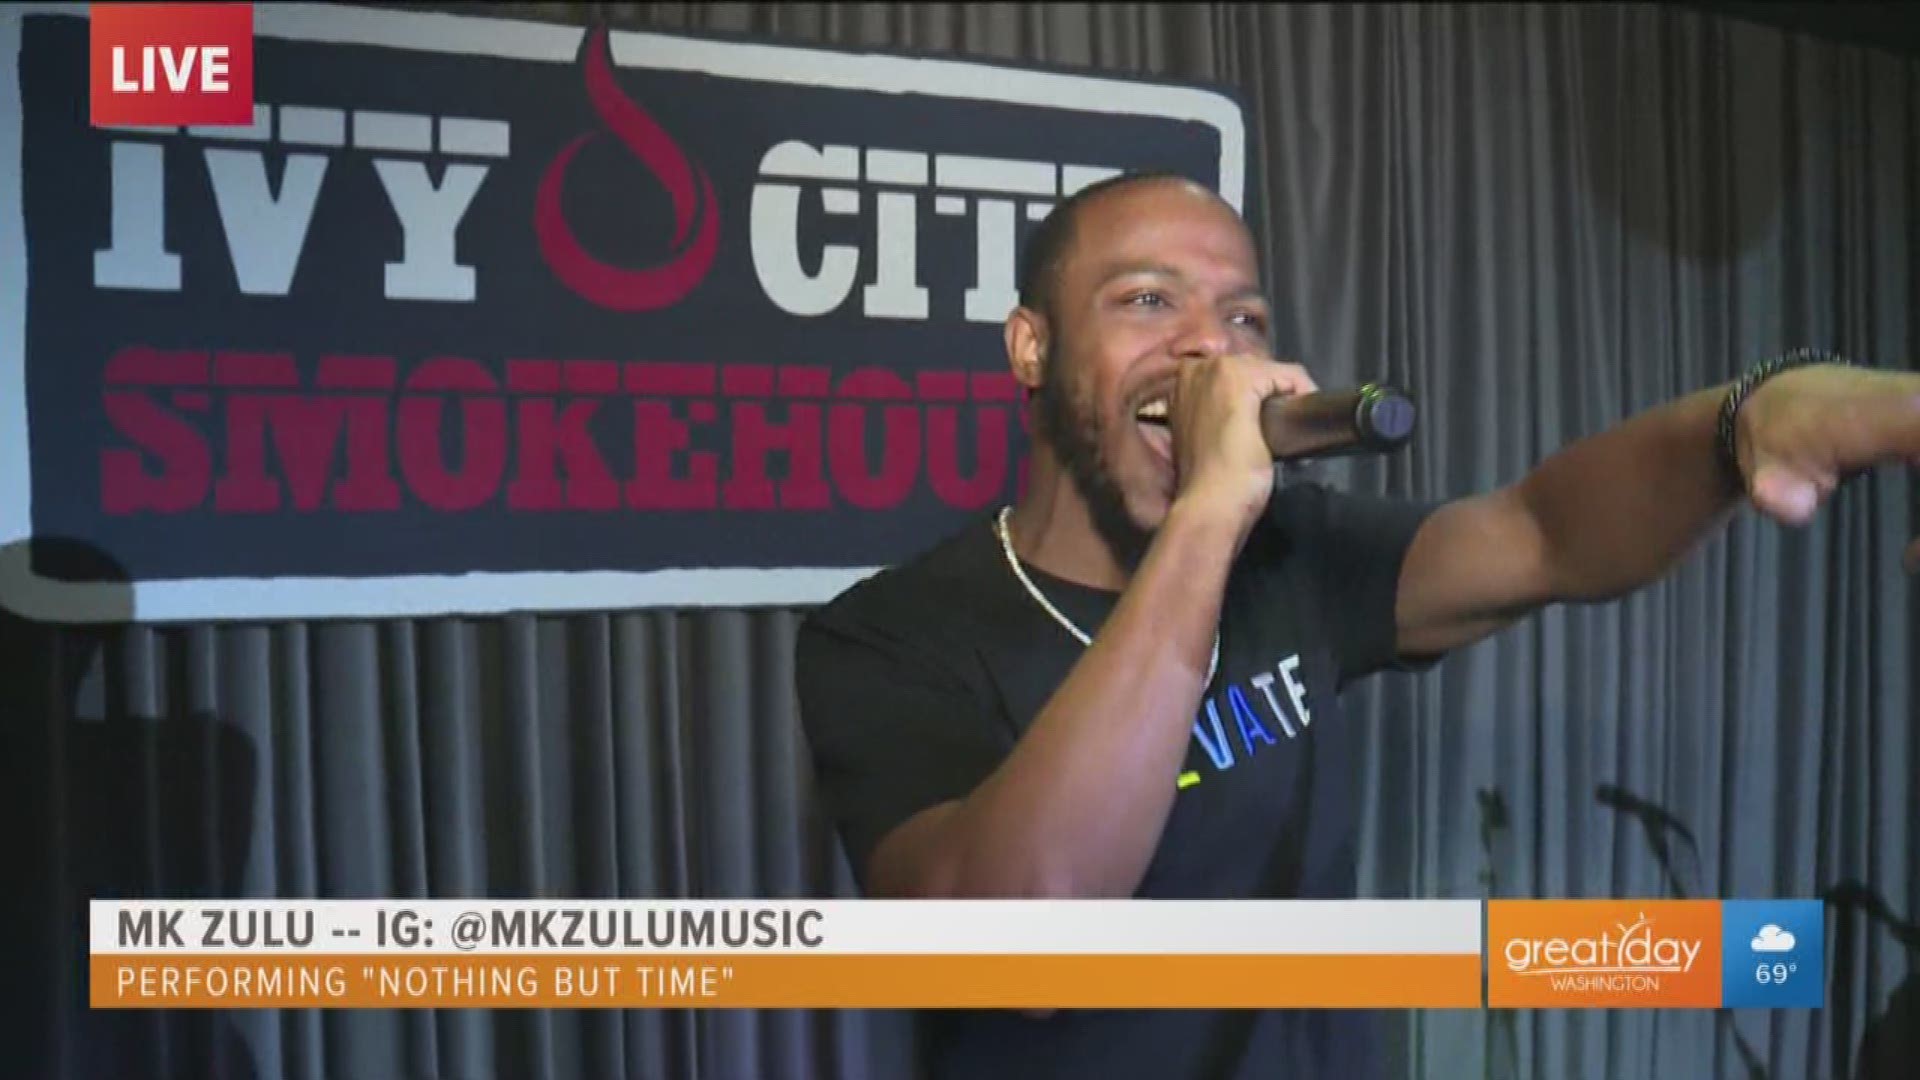 MK Zulu performs "Nothing But Time" in the DMV Soundcheck (IG: @mkzulumusic).  This segment is sponsored by The DC Office of Cable Television, Film, Music, and Entertainment.